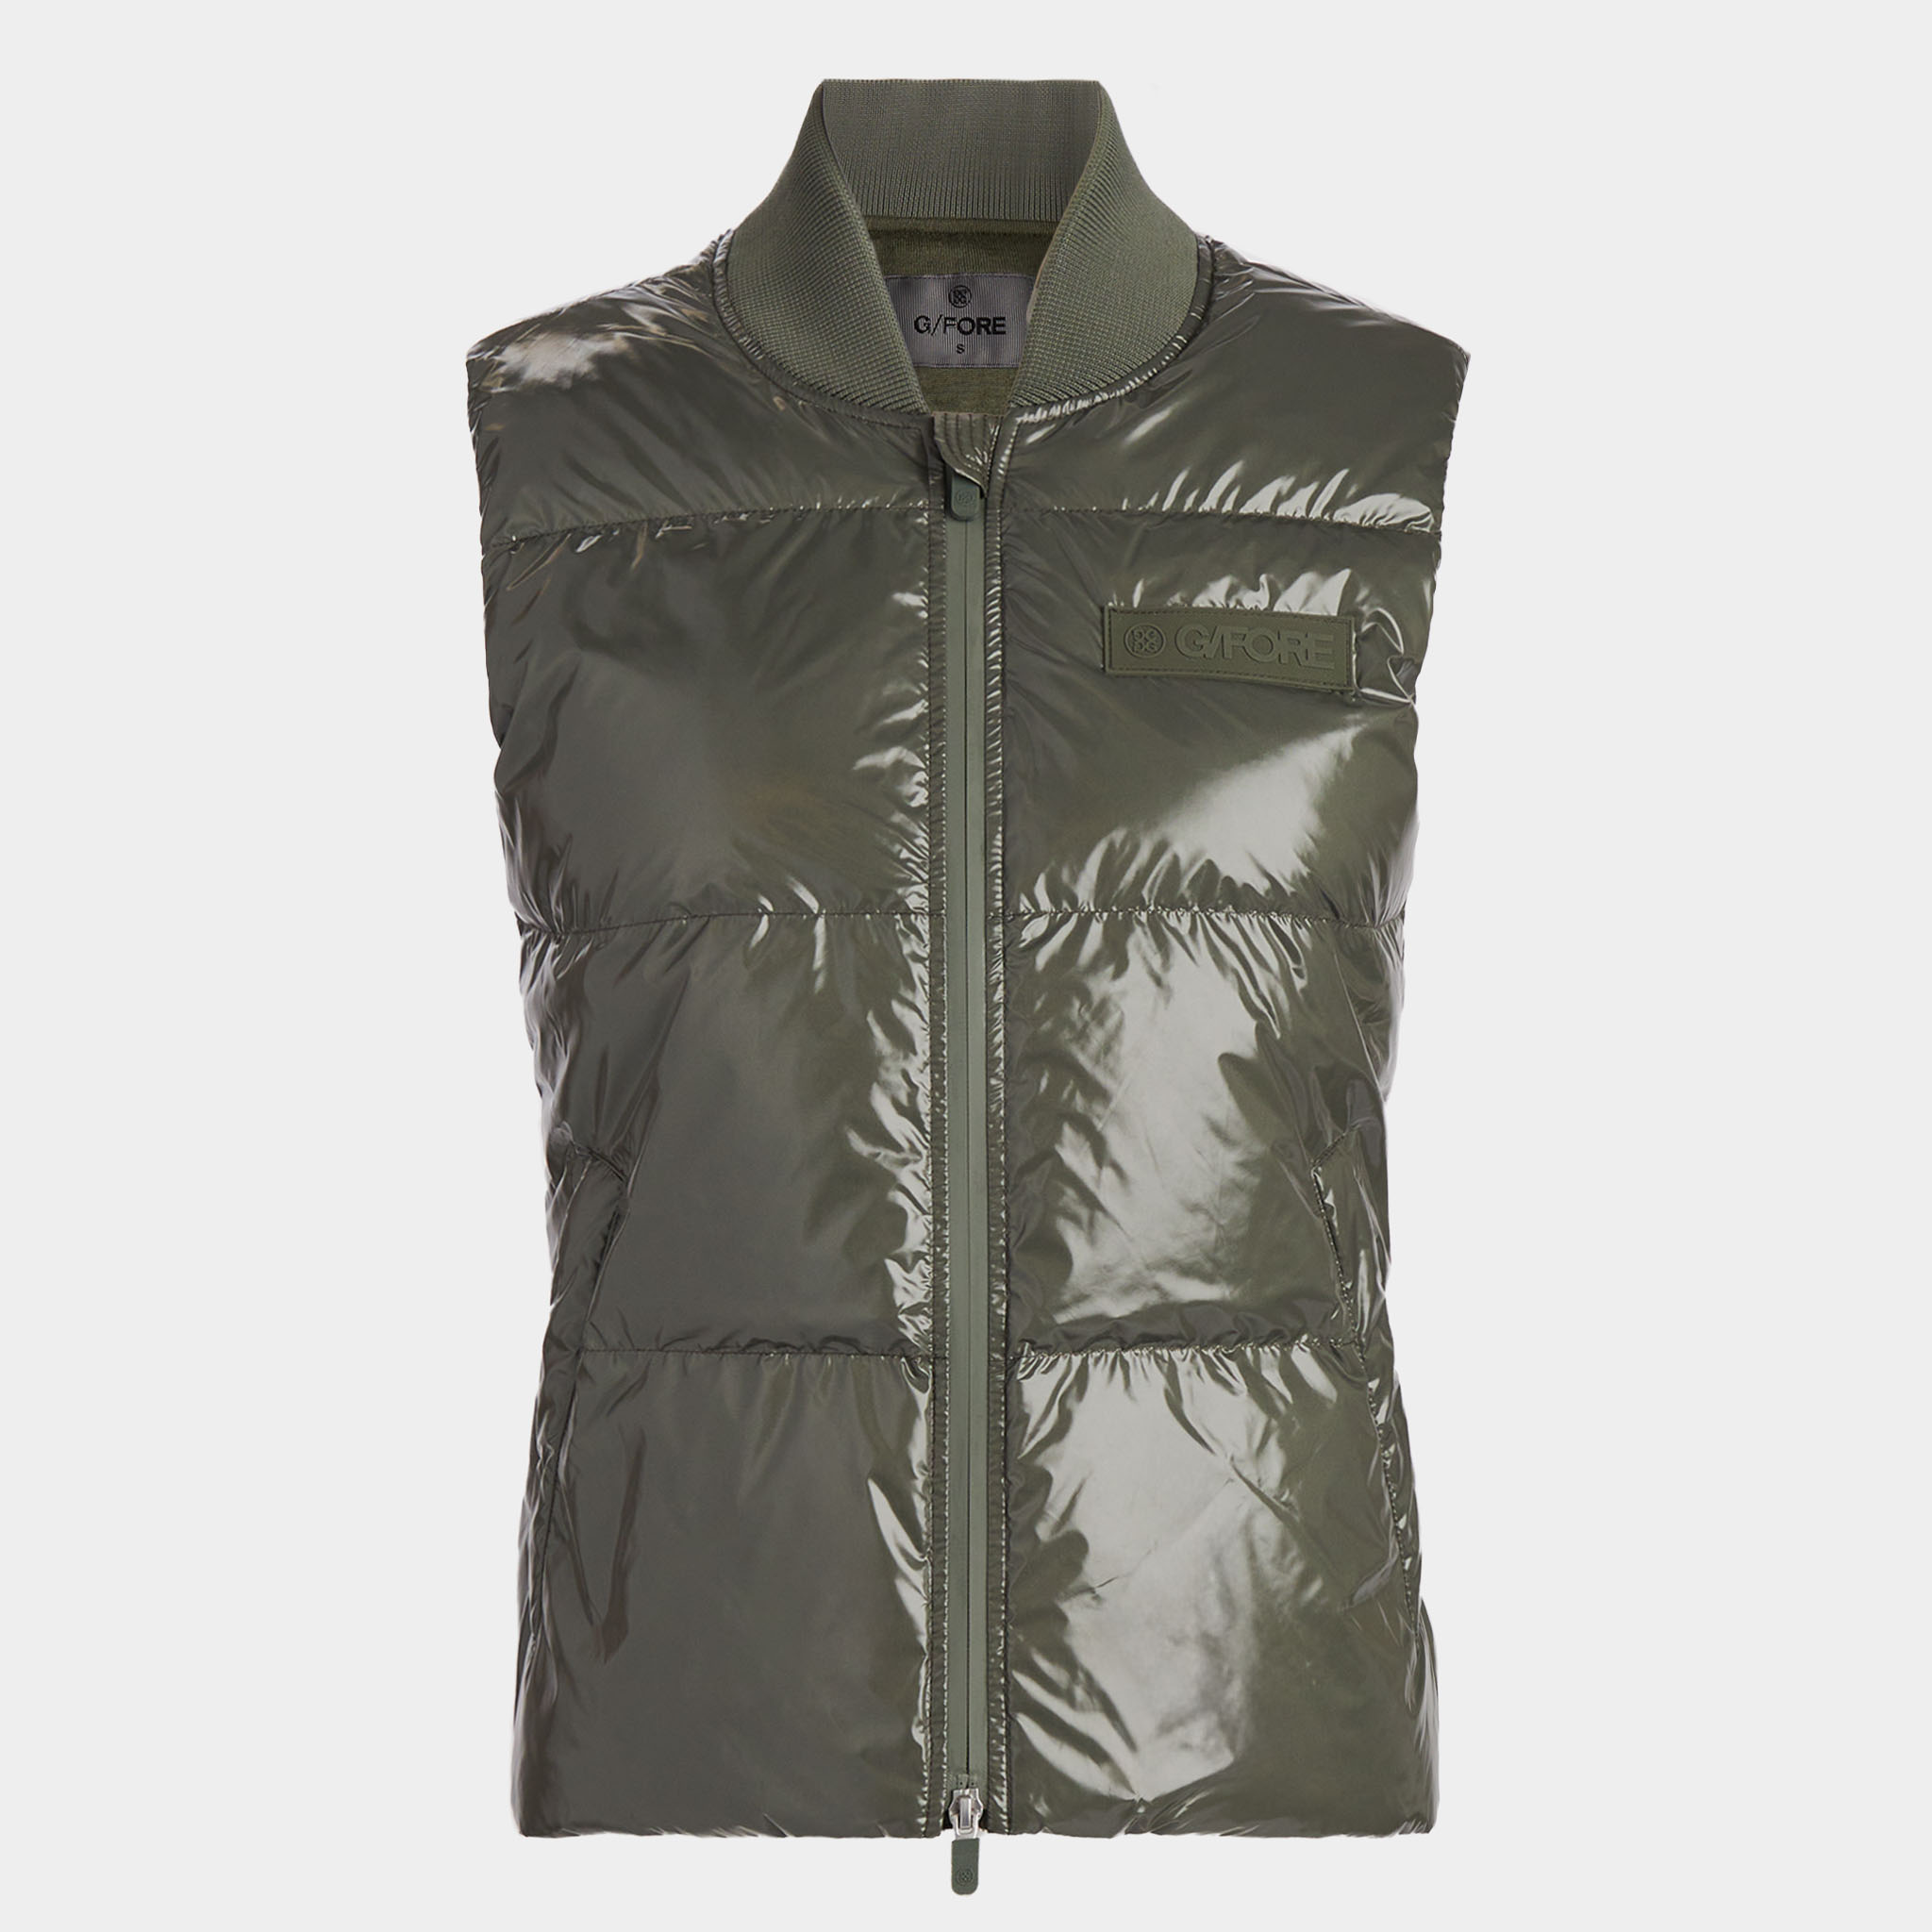 George Women's Long Quilted Vest 